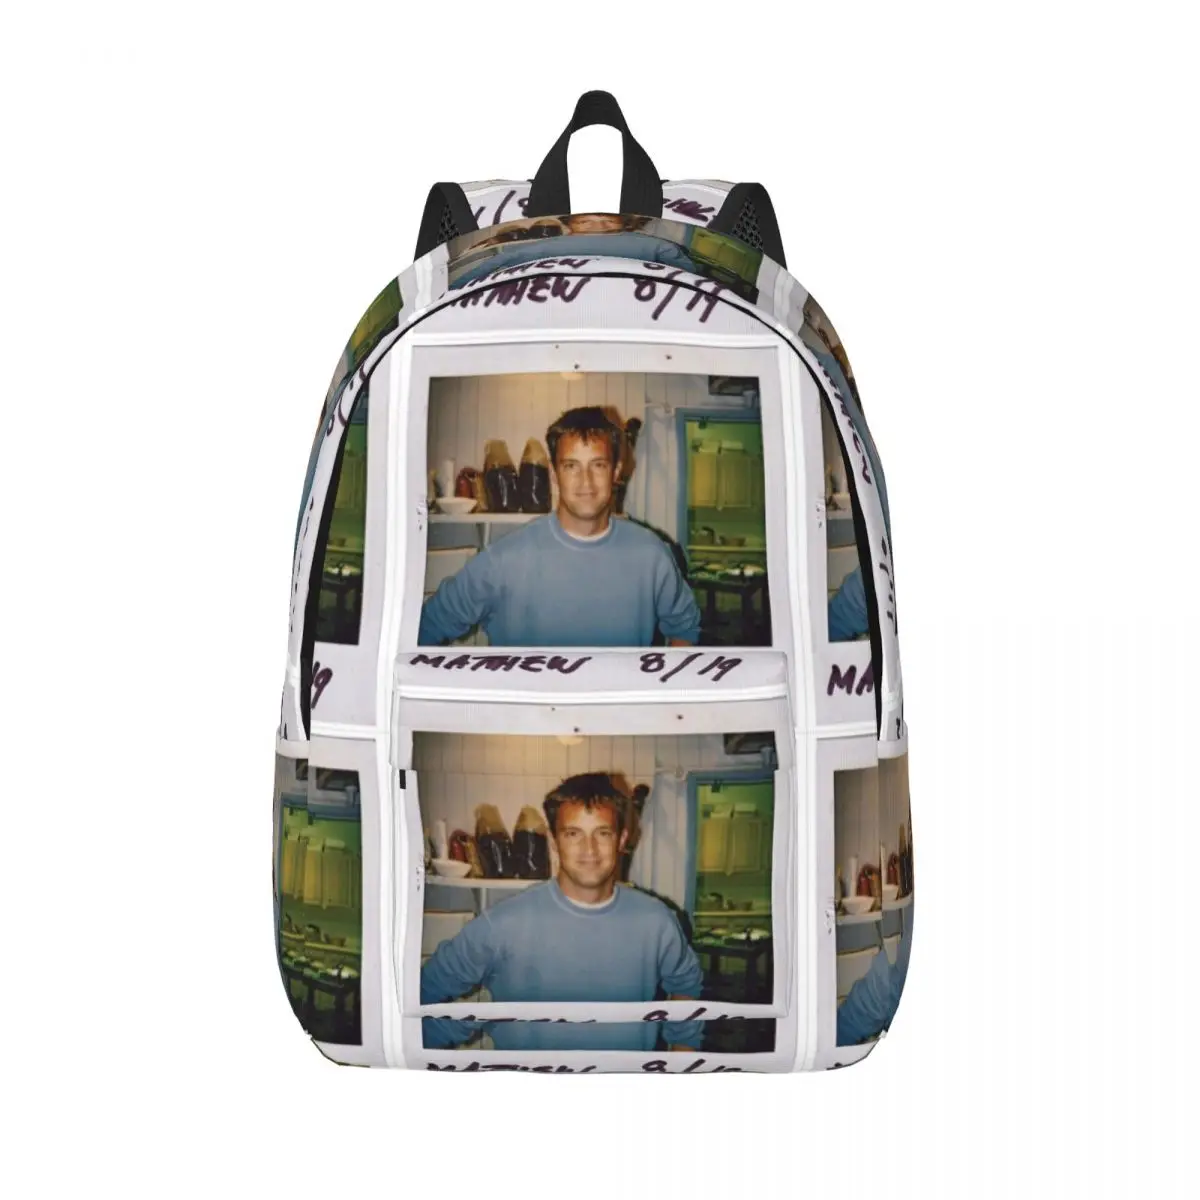 

Rip Matthew Perry Backpack for Men Women Teenage Student Work Daypack College Canvas Bags Outdoor